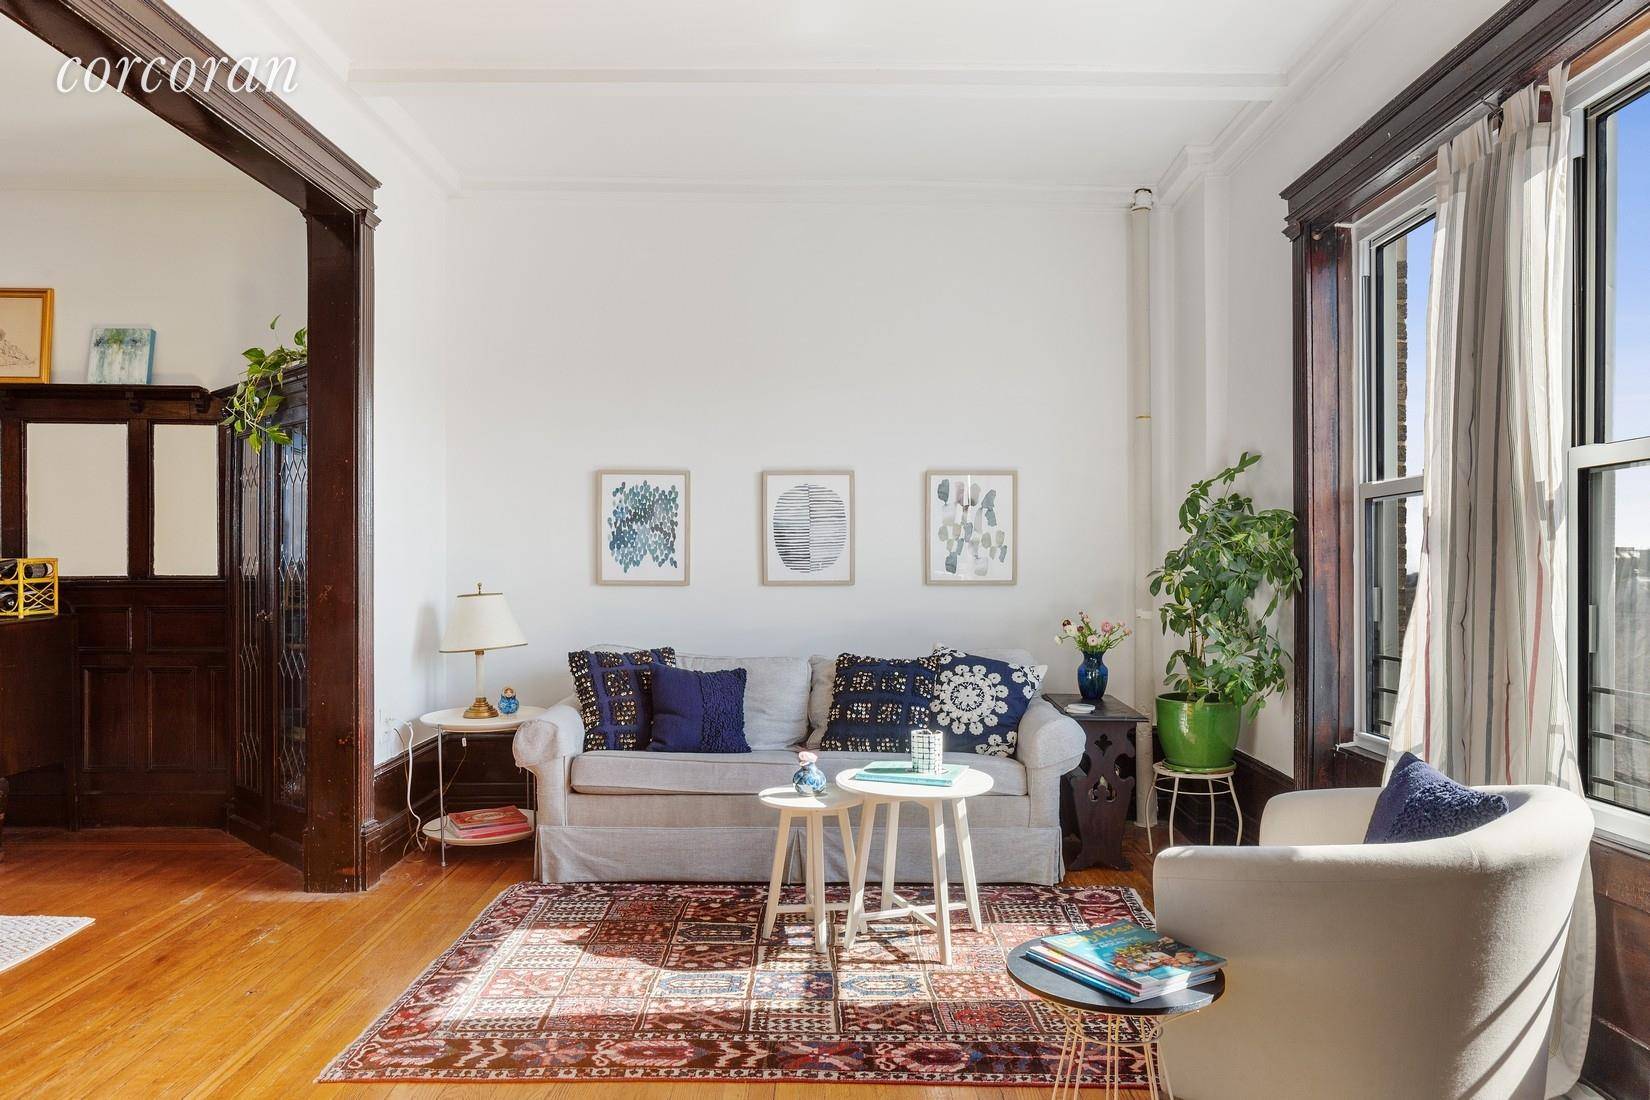 Meticulously preserved period detail, a renovated kitchen and bath, two bedrooms, and a FORMAL DINING ROOM This sprawling prewar coop apartment is truly special.